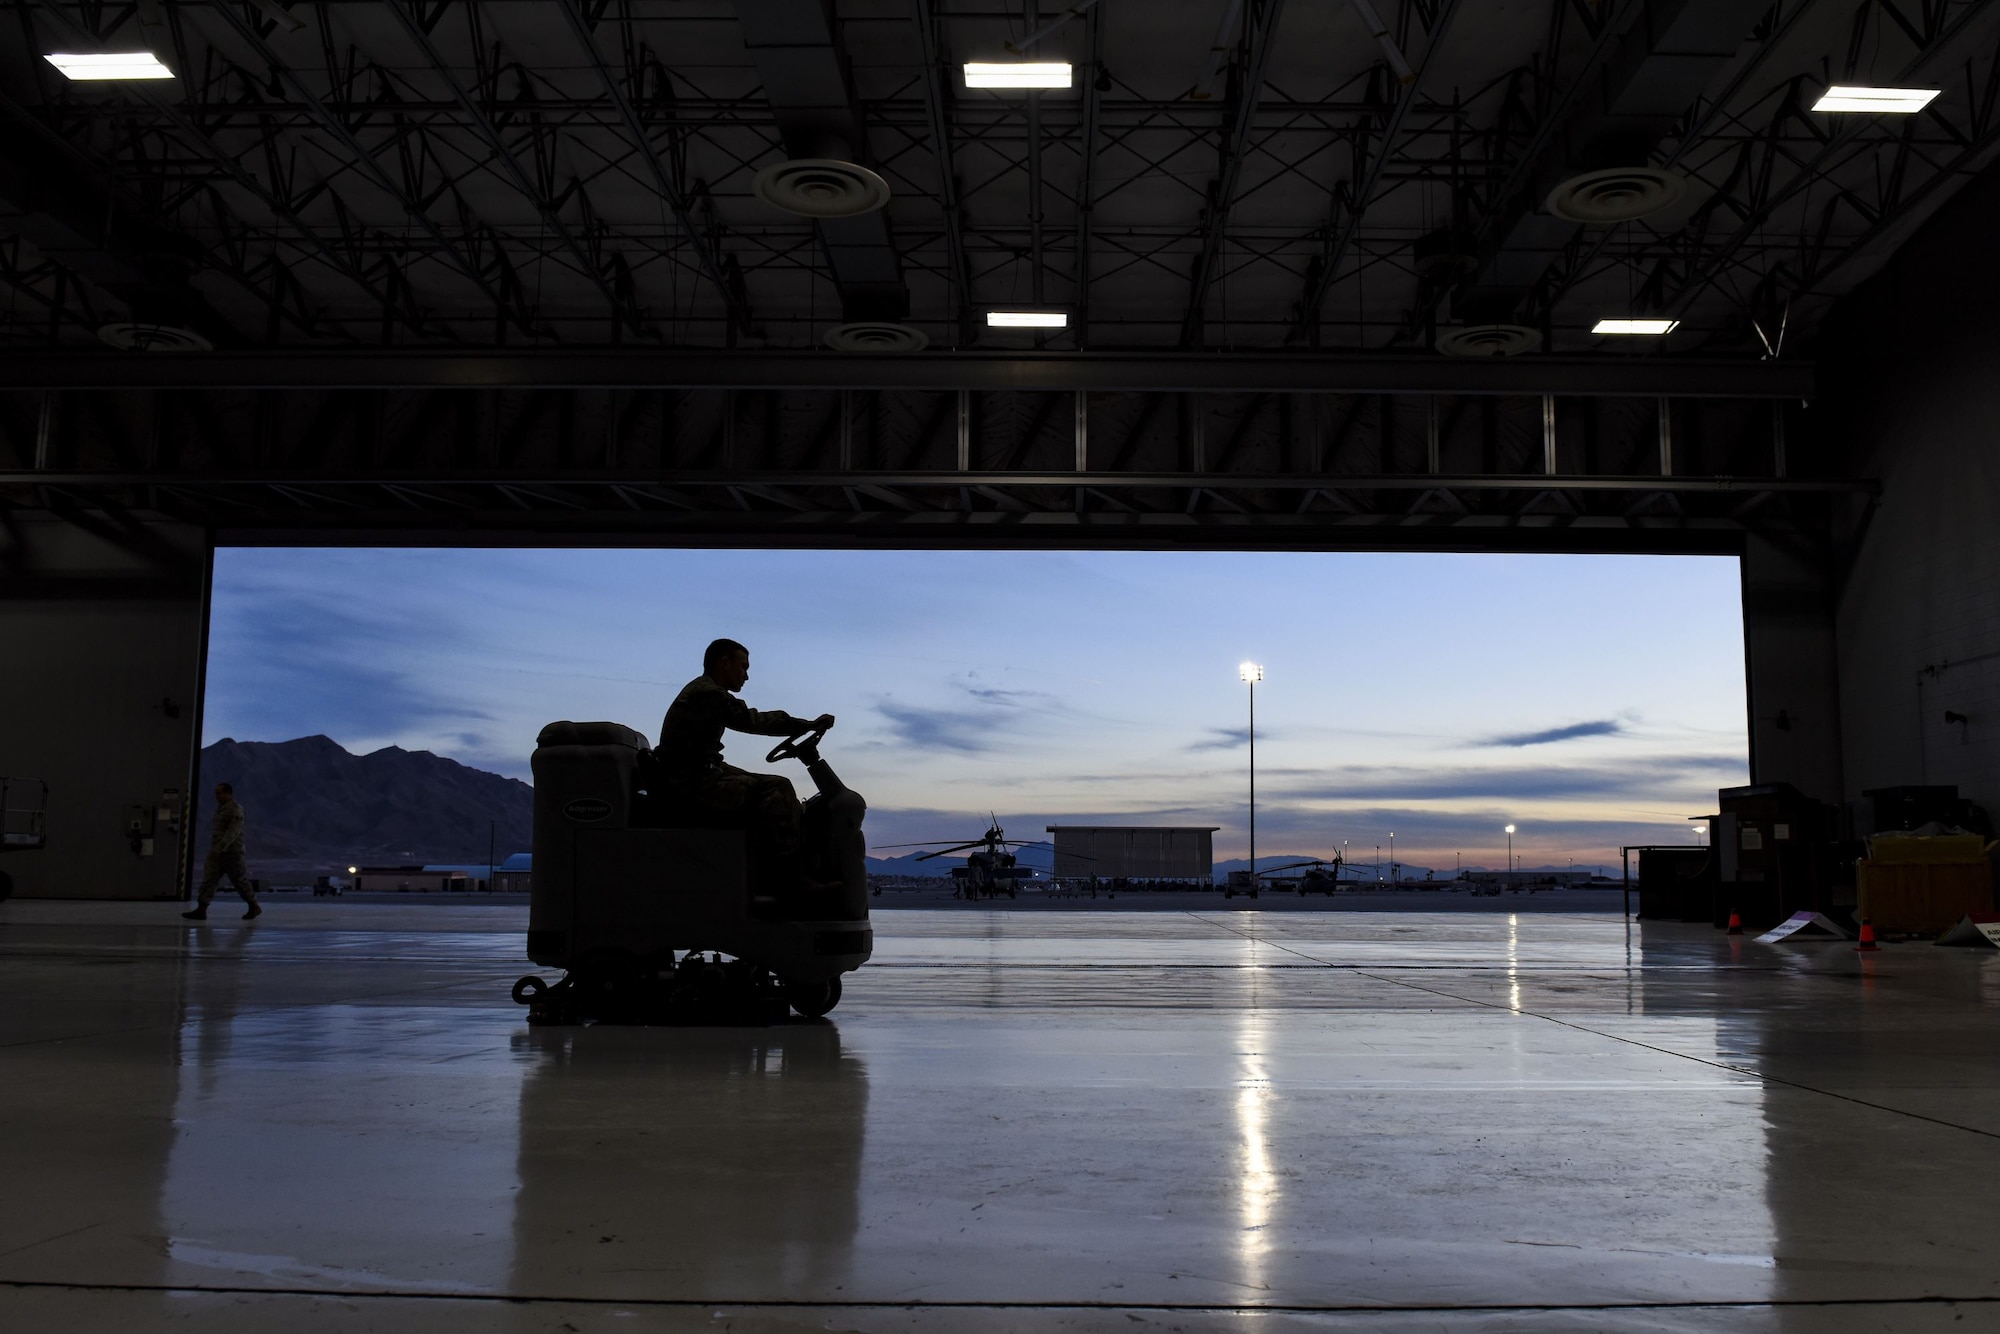 Airman 1st Class Charles Curran, 823rd Maintenance Squadron electrical environmental apprentice, uses a floor scrubber at Nellis Air Force Base, Nev., Jan. 5, 2018. Floor scrubbers remove dust, oil and grease to maintain a safe and clean work environment. (U.S. Air Force photo by Airman 1st Class Andrew D. Sarver)